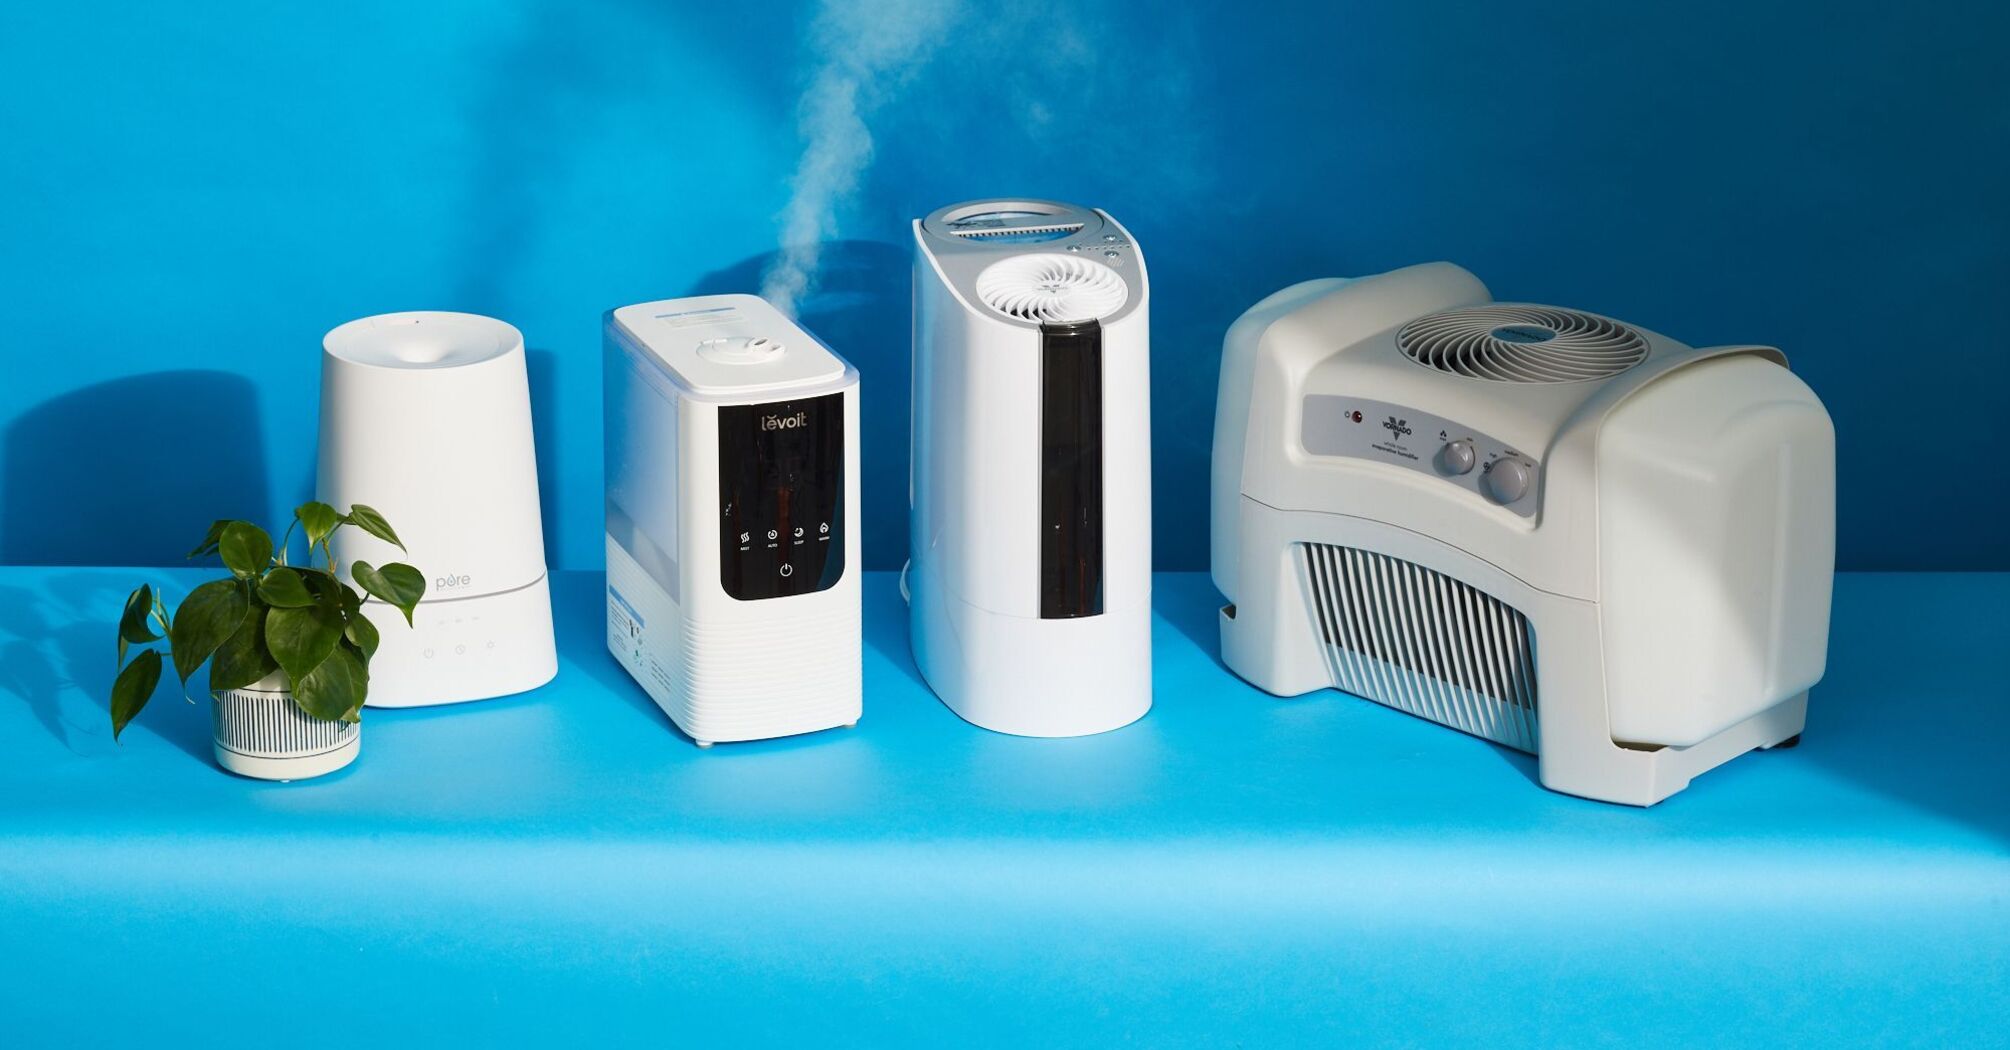 How to choose the best humidifier